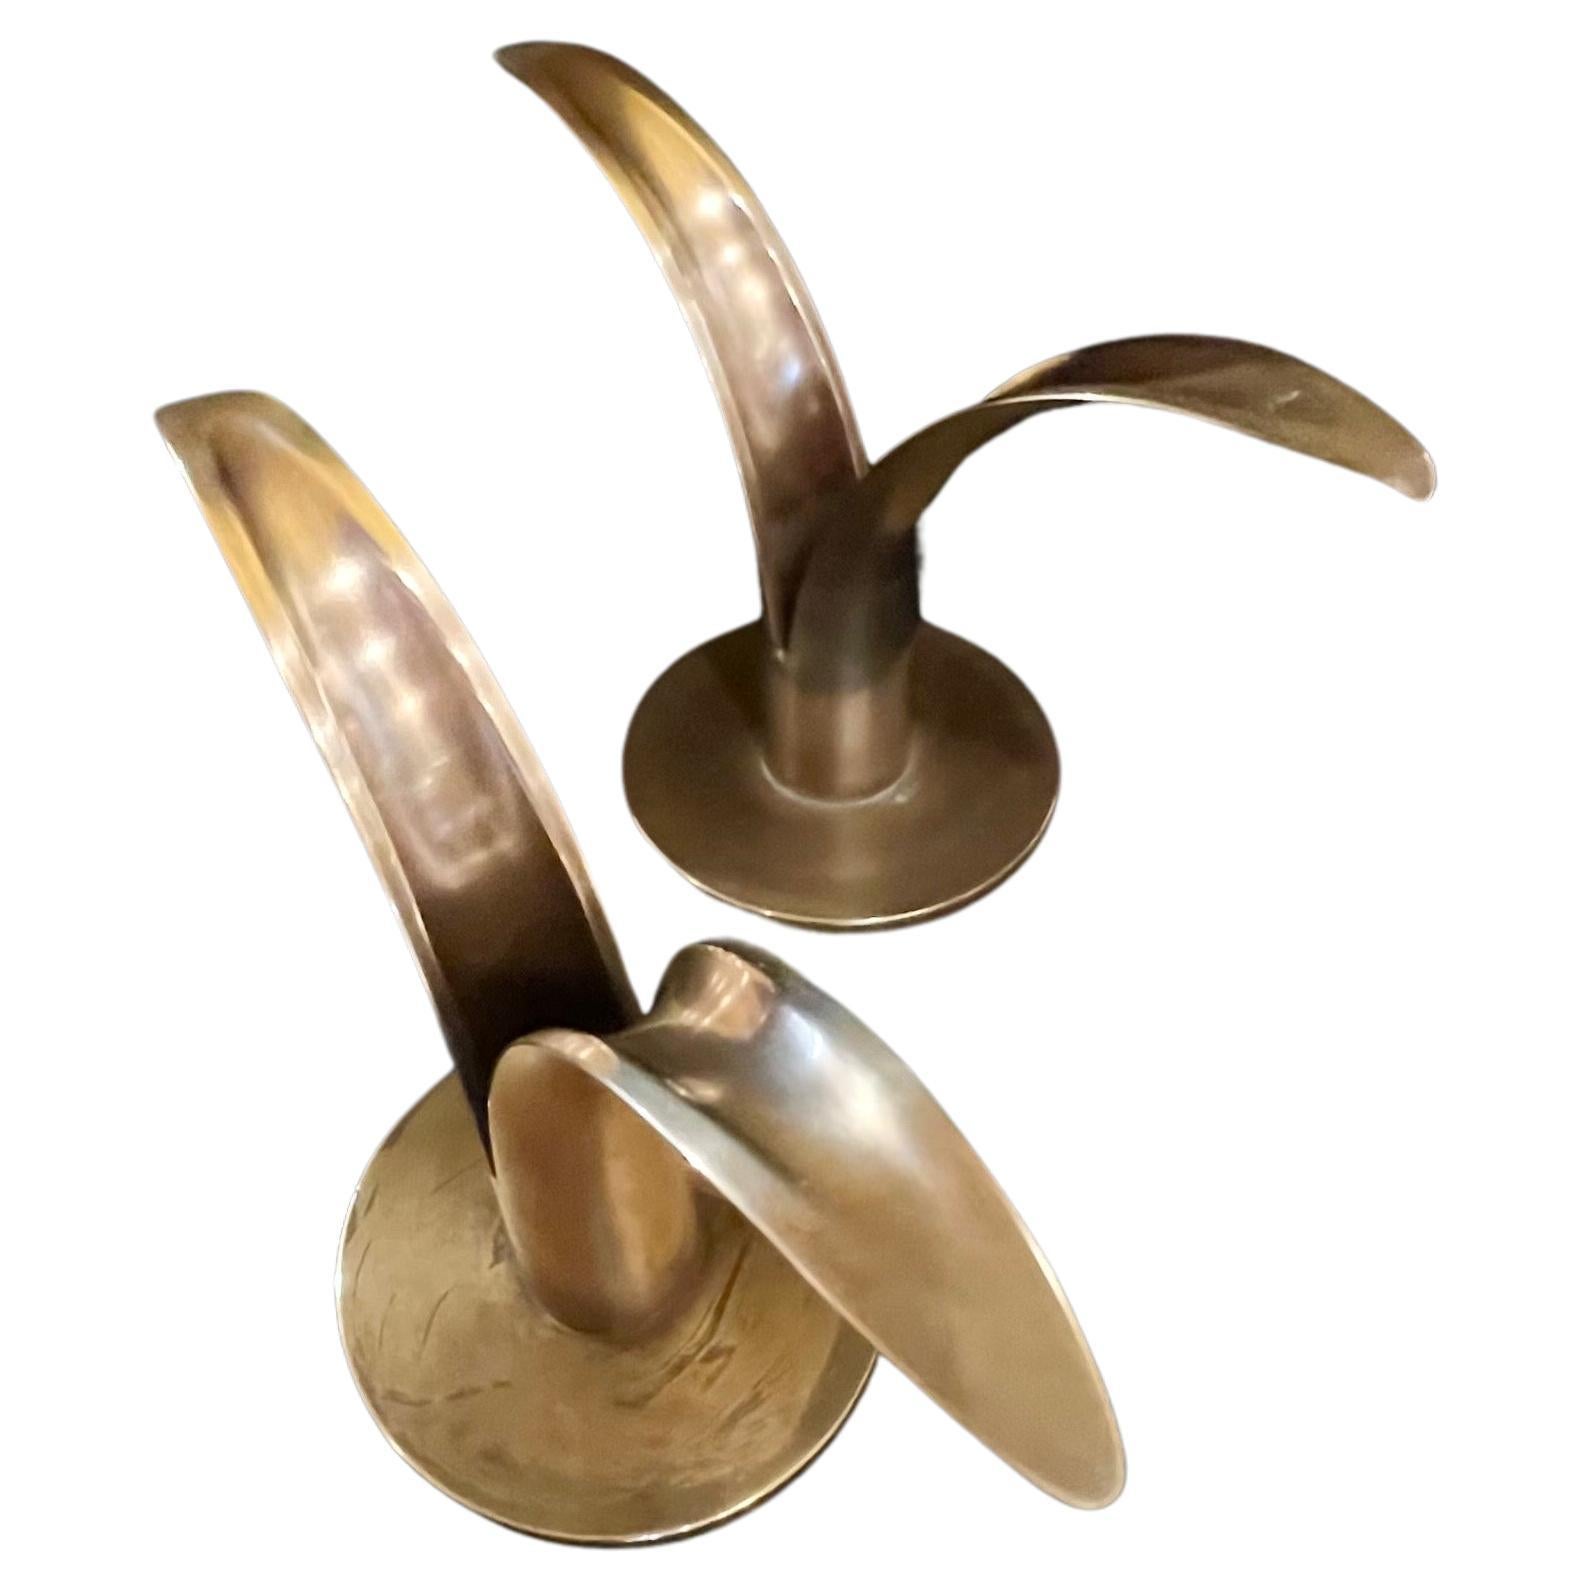 Beautiful Pair of solid brass candle holders by Ivar Åhlenius Björk and Lily Liljan for Ystad Metall in patinated Brass.  Made in Sweden